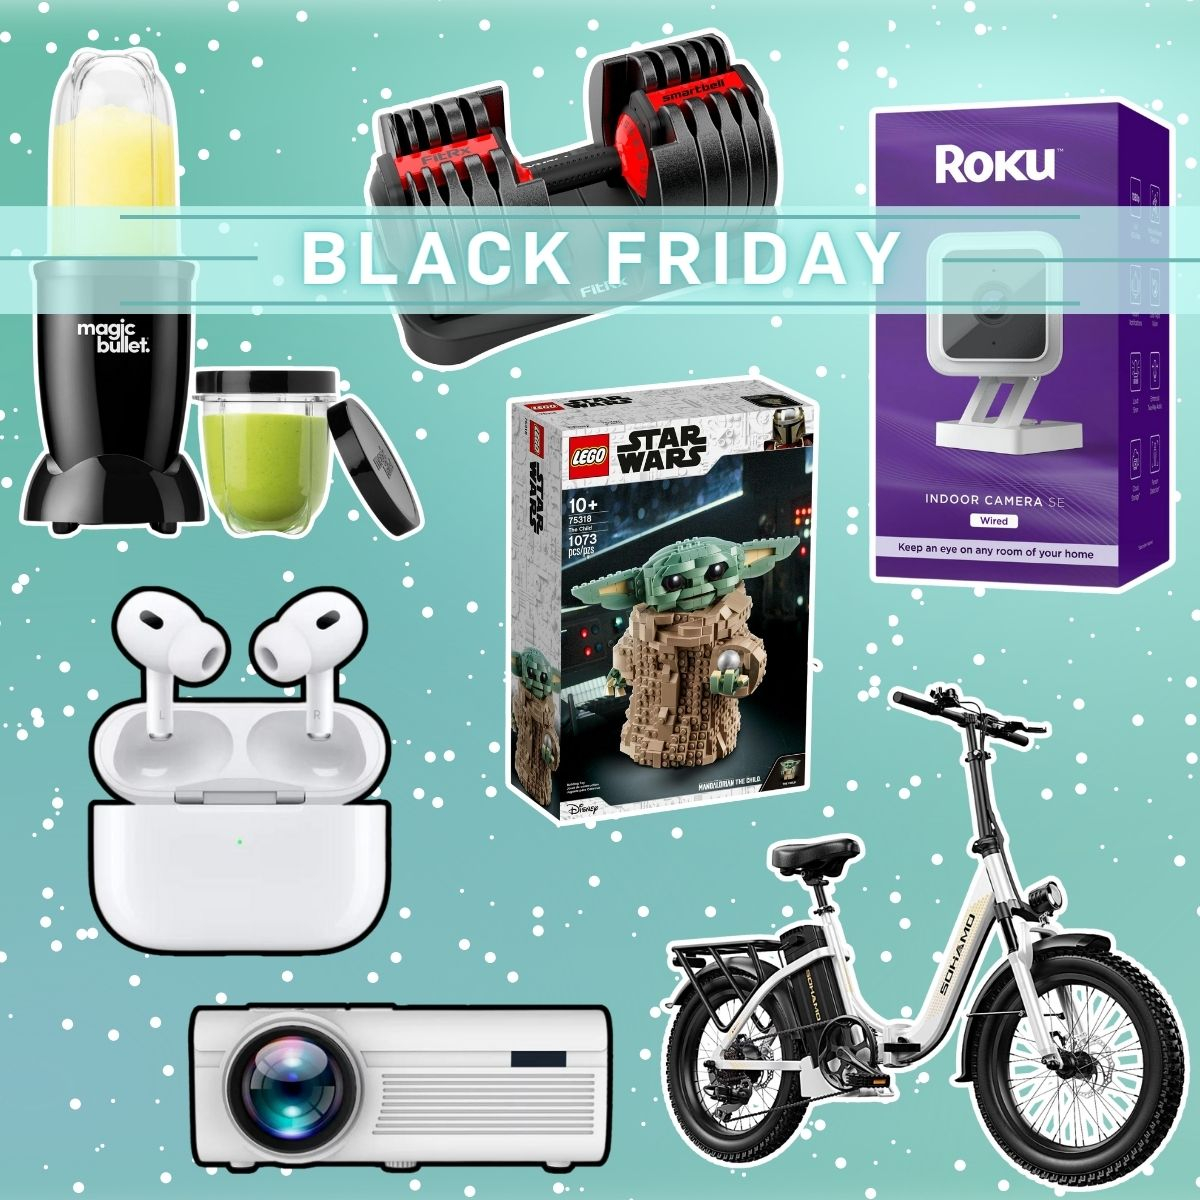 160+ Walmart Black Friday Deals to Shop Now: TVs, Laptops, Legos, and More